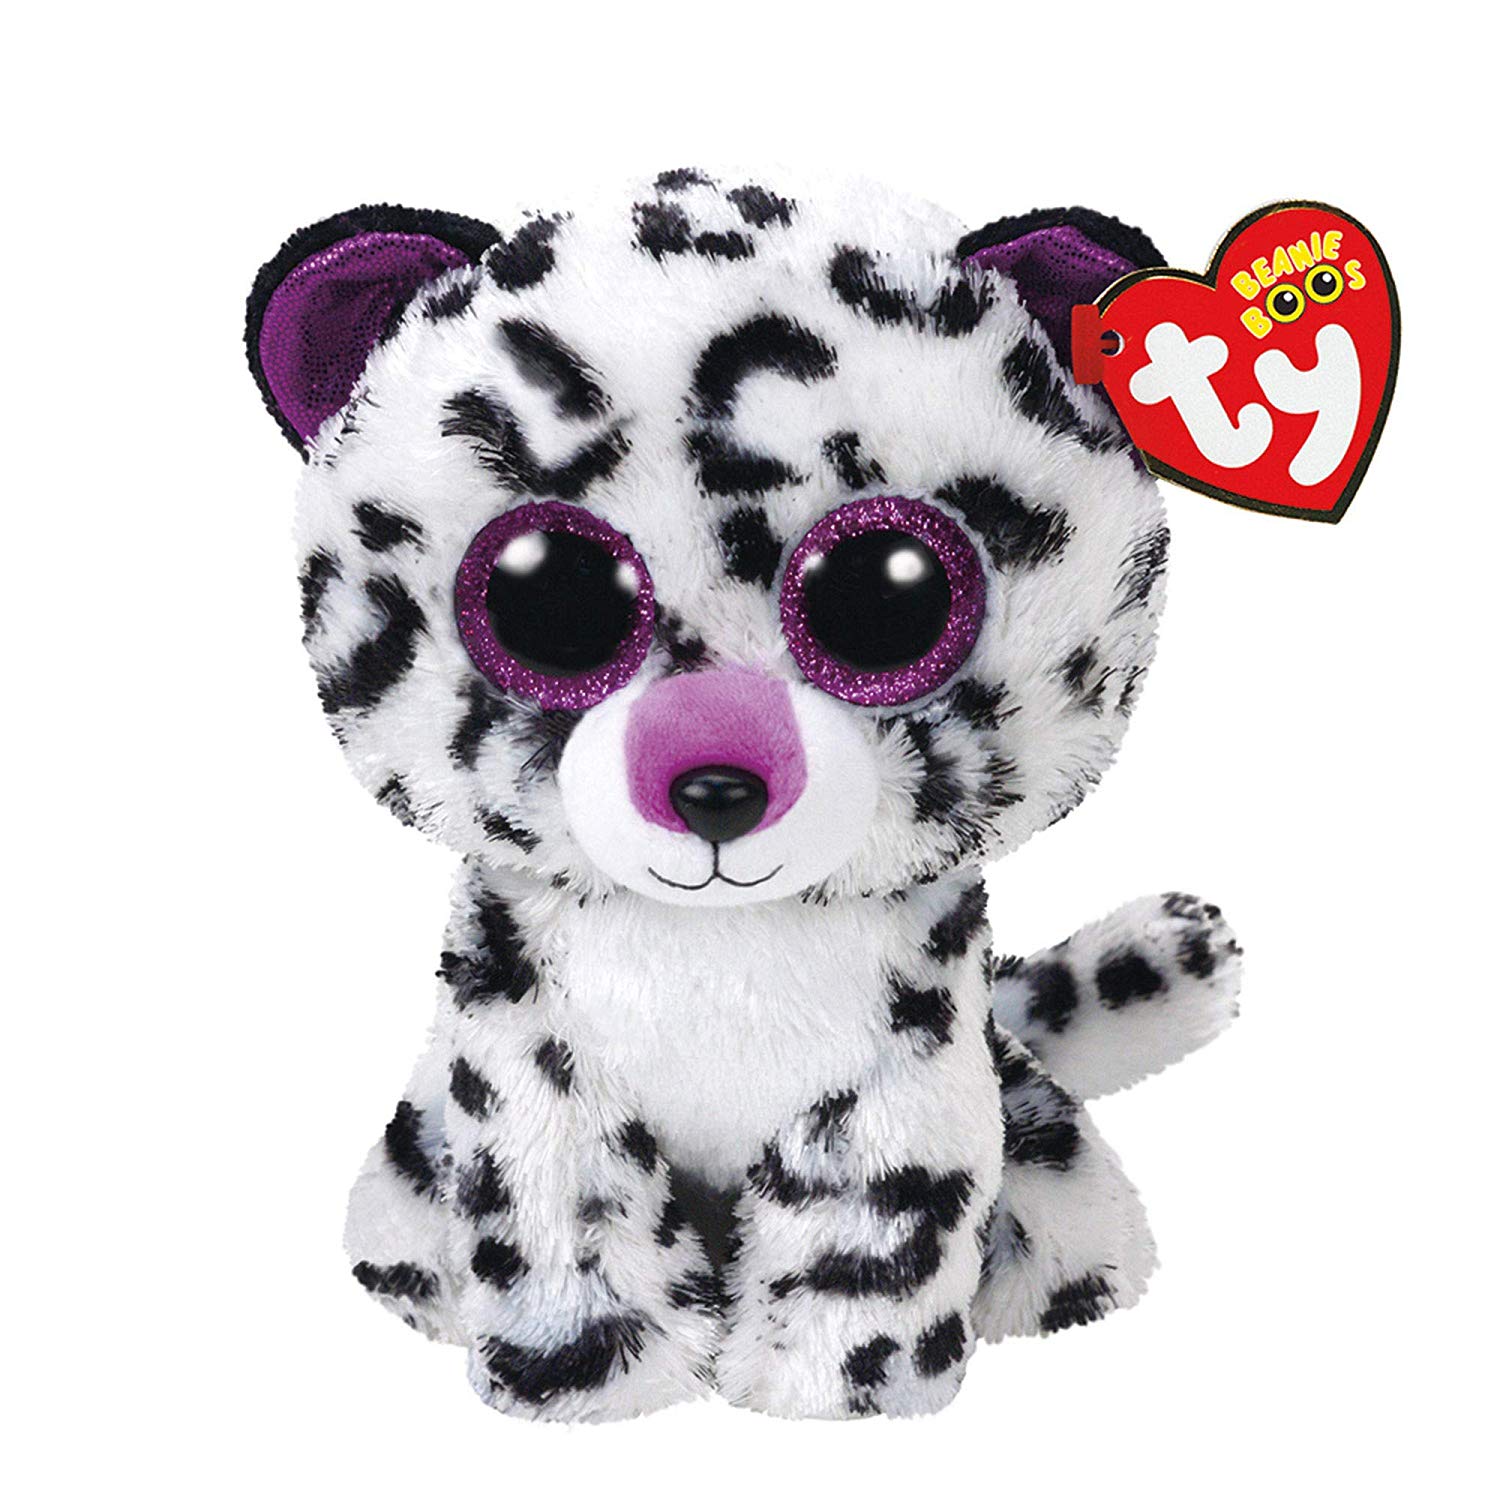 JEWEL the Leopard Ty 6 " Beanie Boos NEW w/ MINT TAGS  Justice Exclusive 